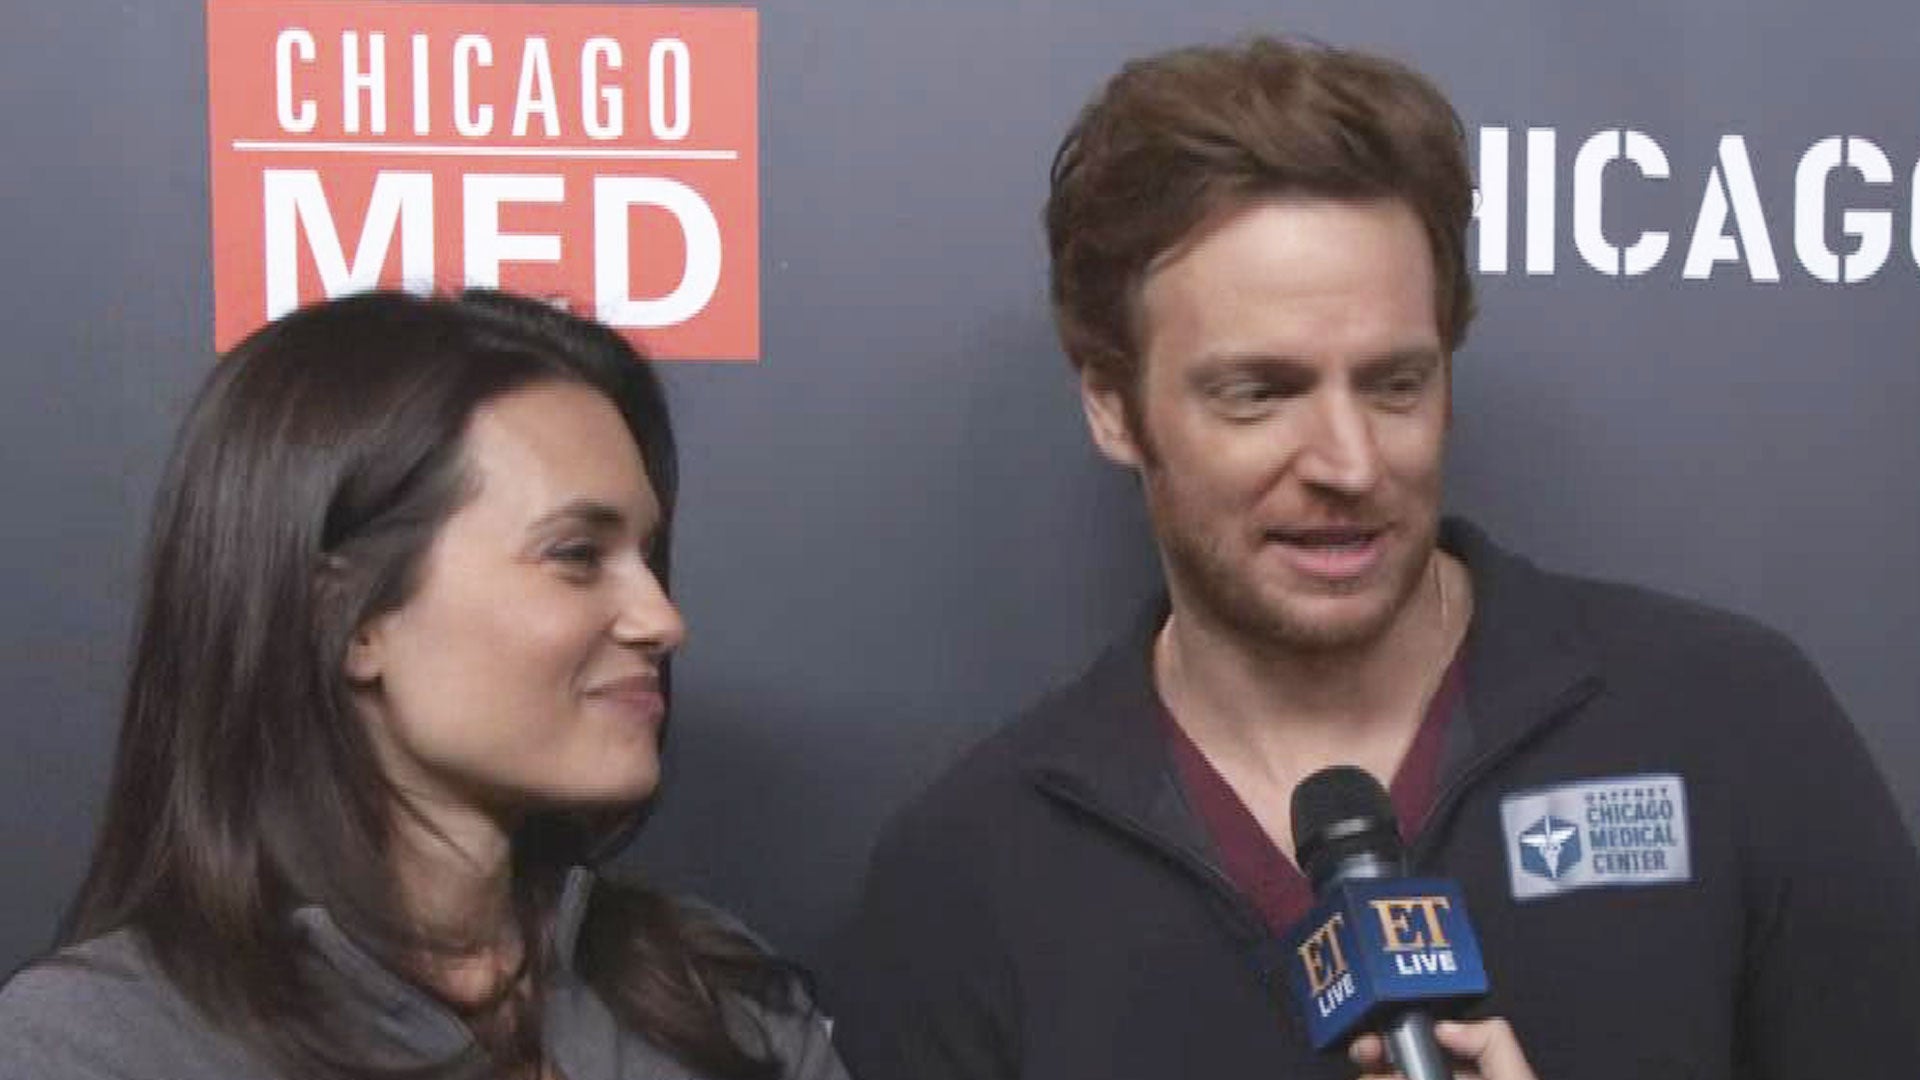 Chicago Med alum Torrey DeVitto confirms engagement and shows off